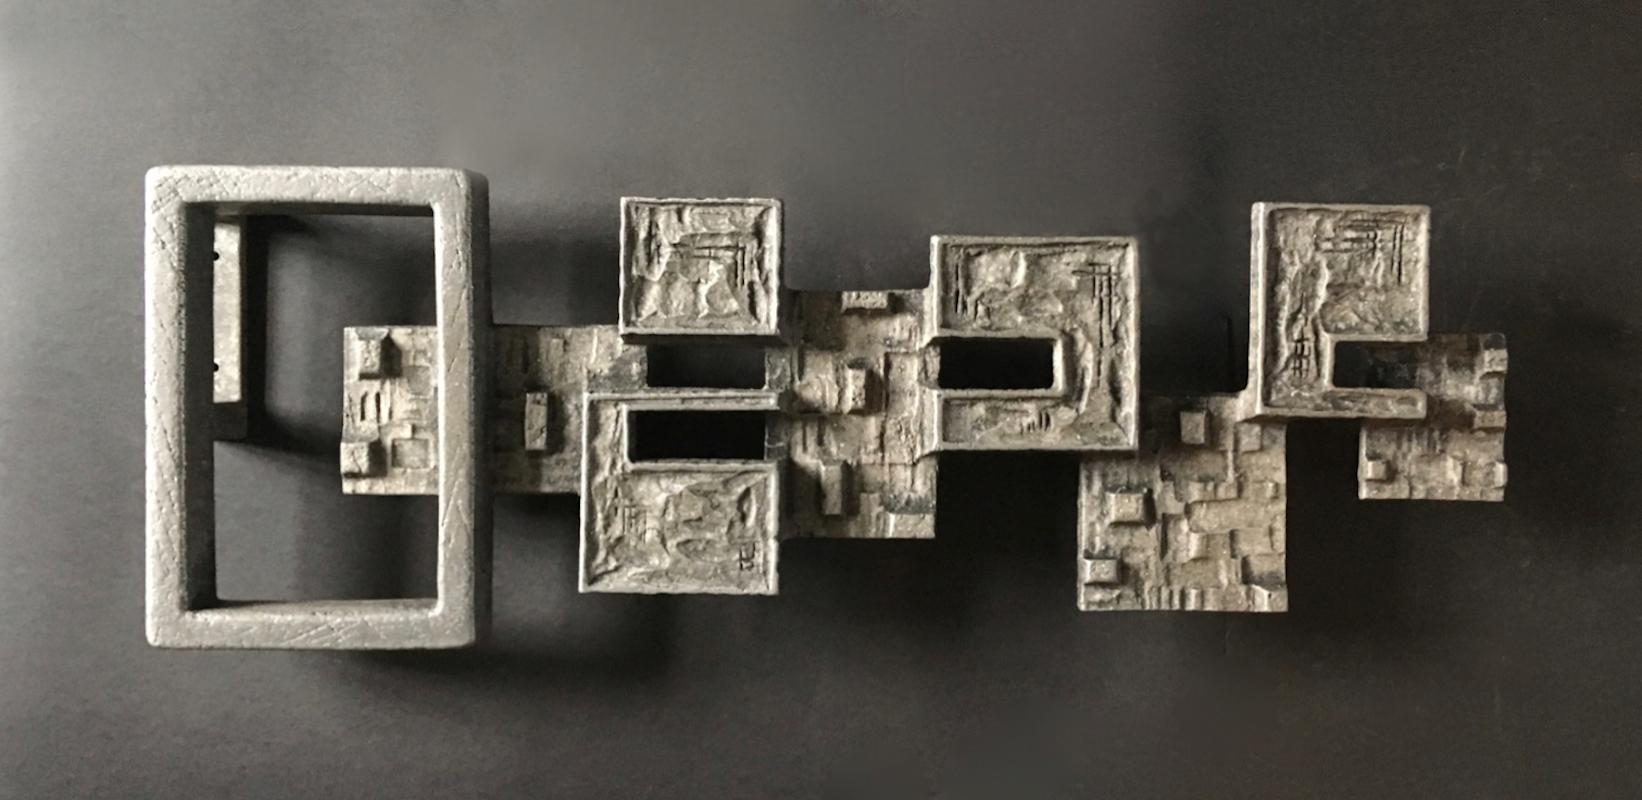 Large Brutalist aluminium push or pull door handle or wall decoration, mid-20th century, Germany.

A striking piece of cast aluminium in good vintage condition, with signs of wear and weathering as one might expect from age and outdoor use.